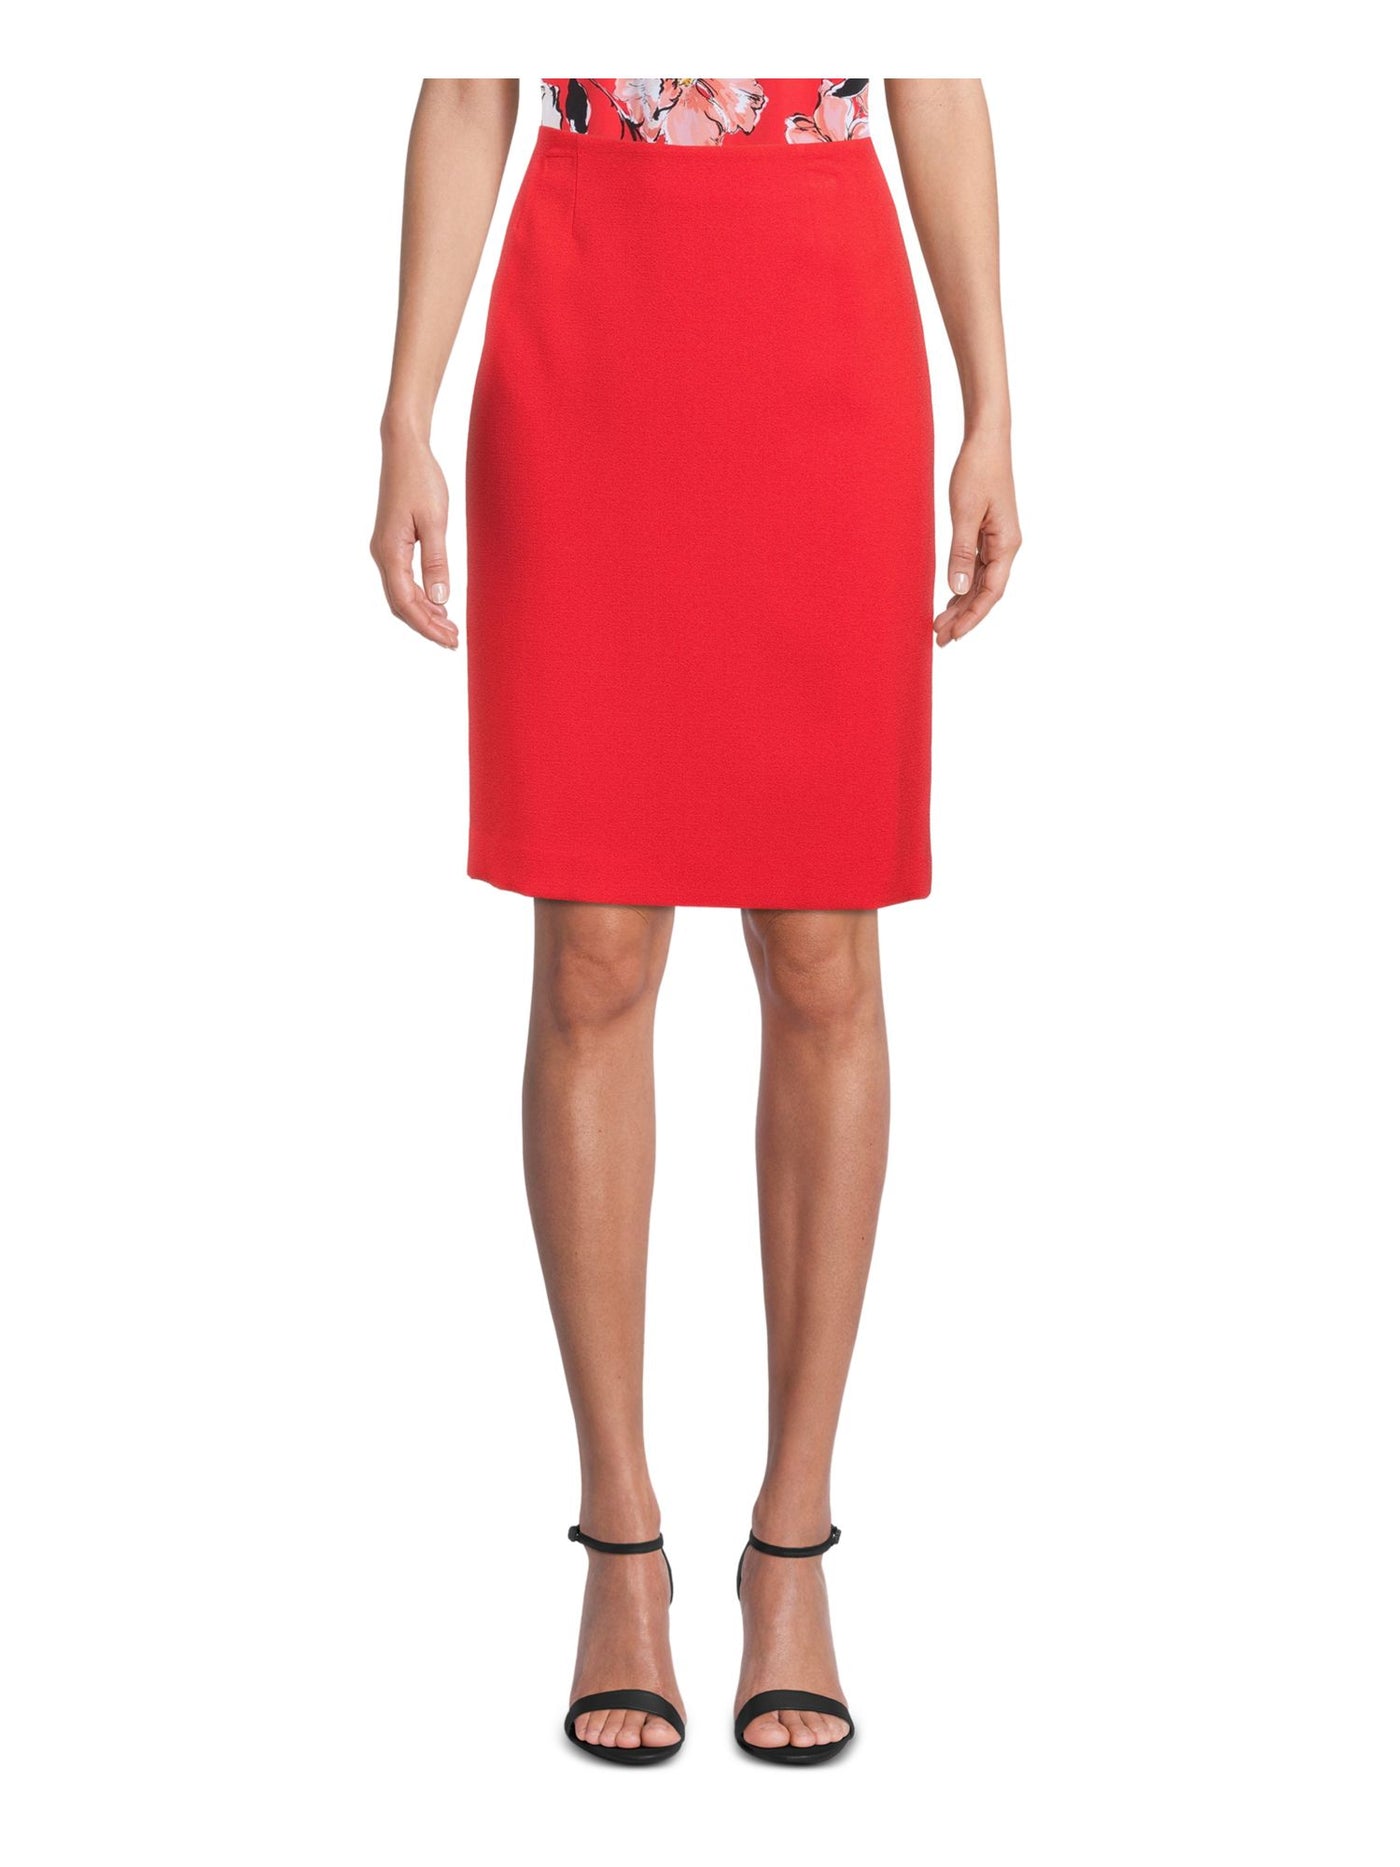 KASPER Womens Red Above The Knee Wear To Work A-Line Skirt Petites 2P